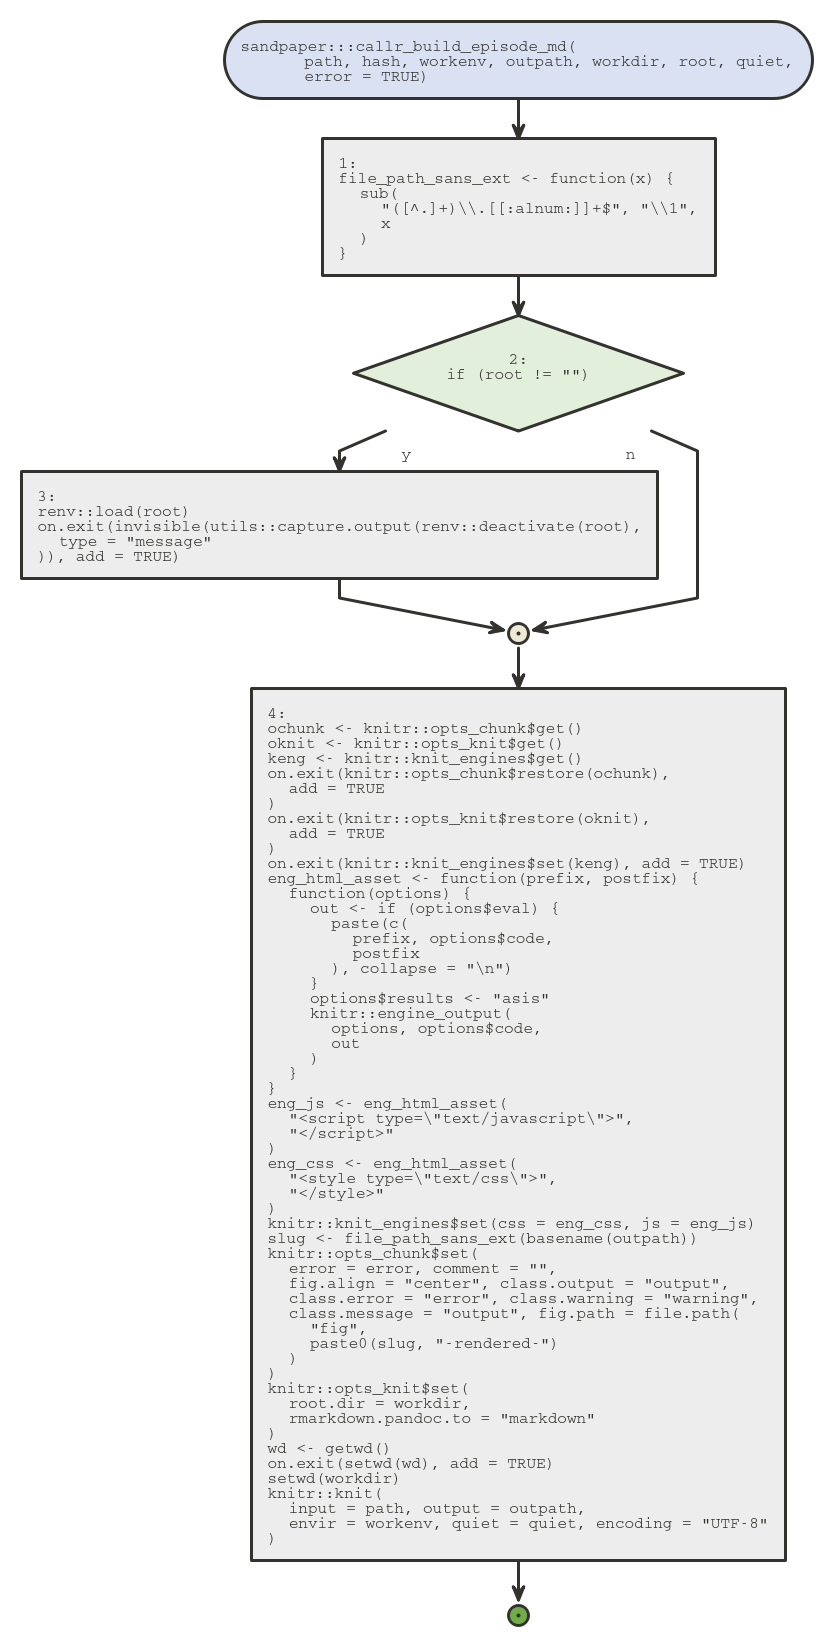 code flow diagram showing a single if statement that controls the loading of renv